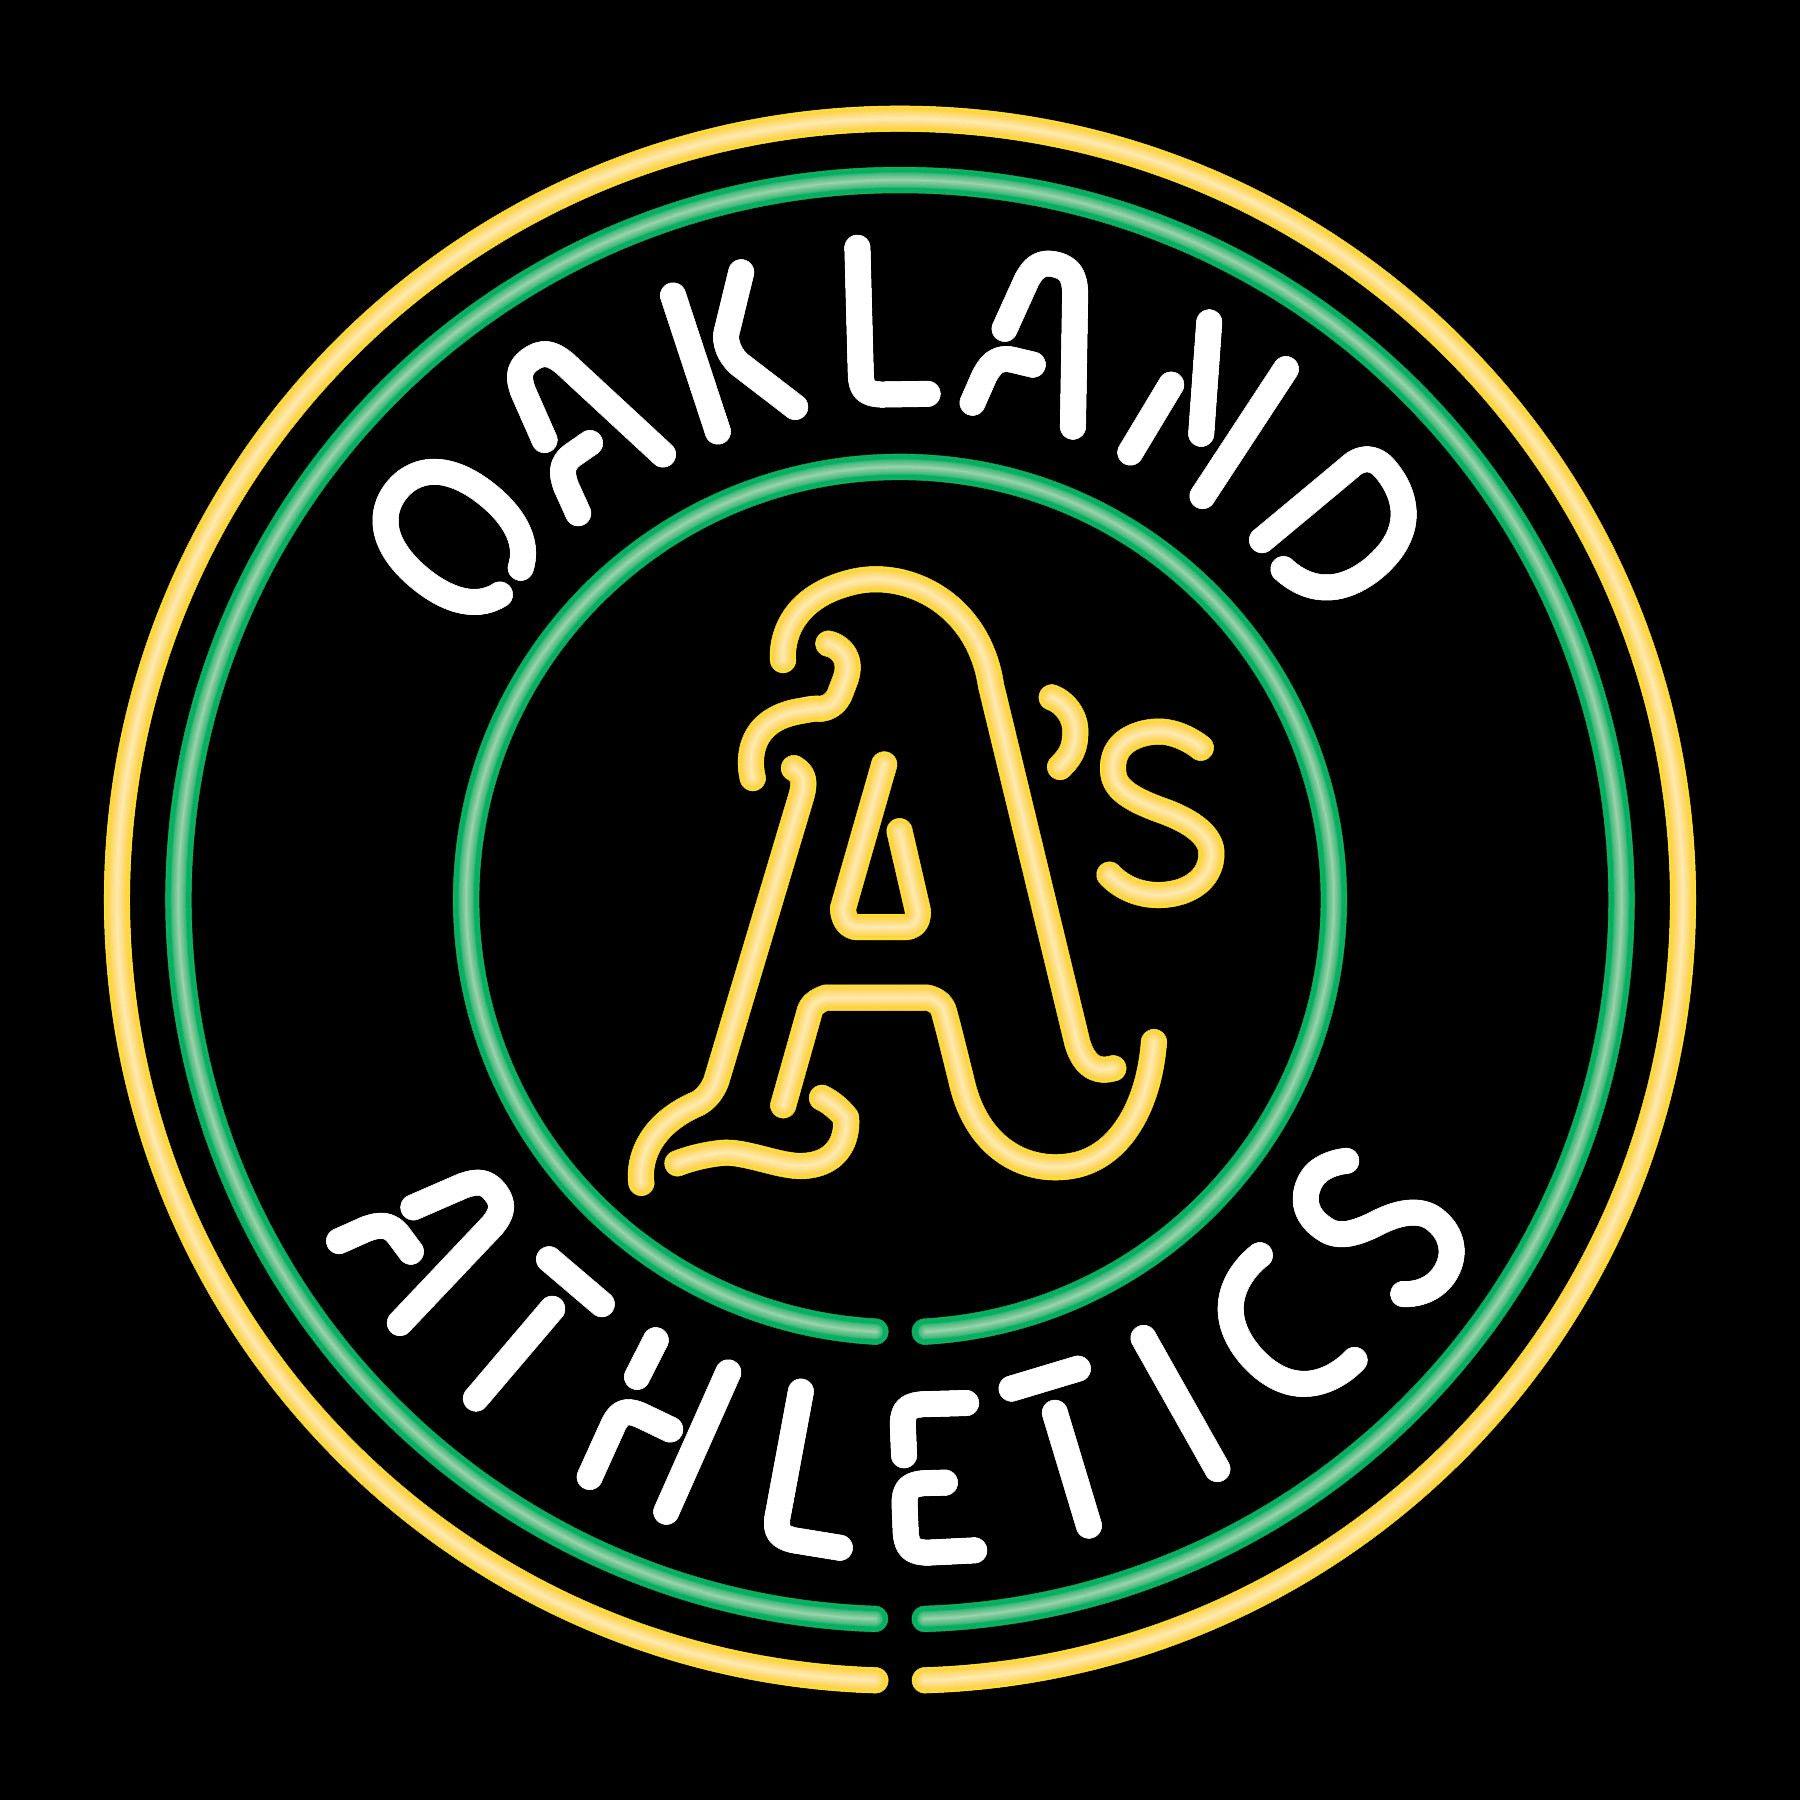 Image detail for -Oakland Athletics Neon Sign